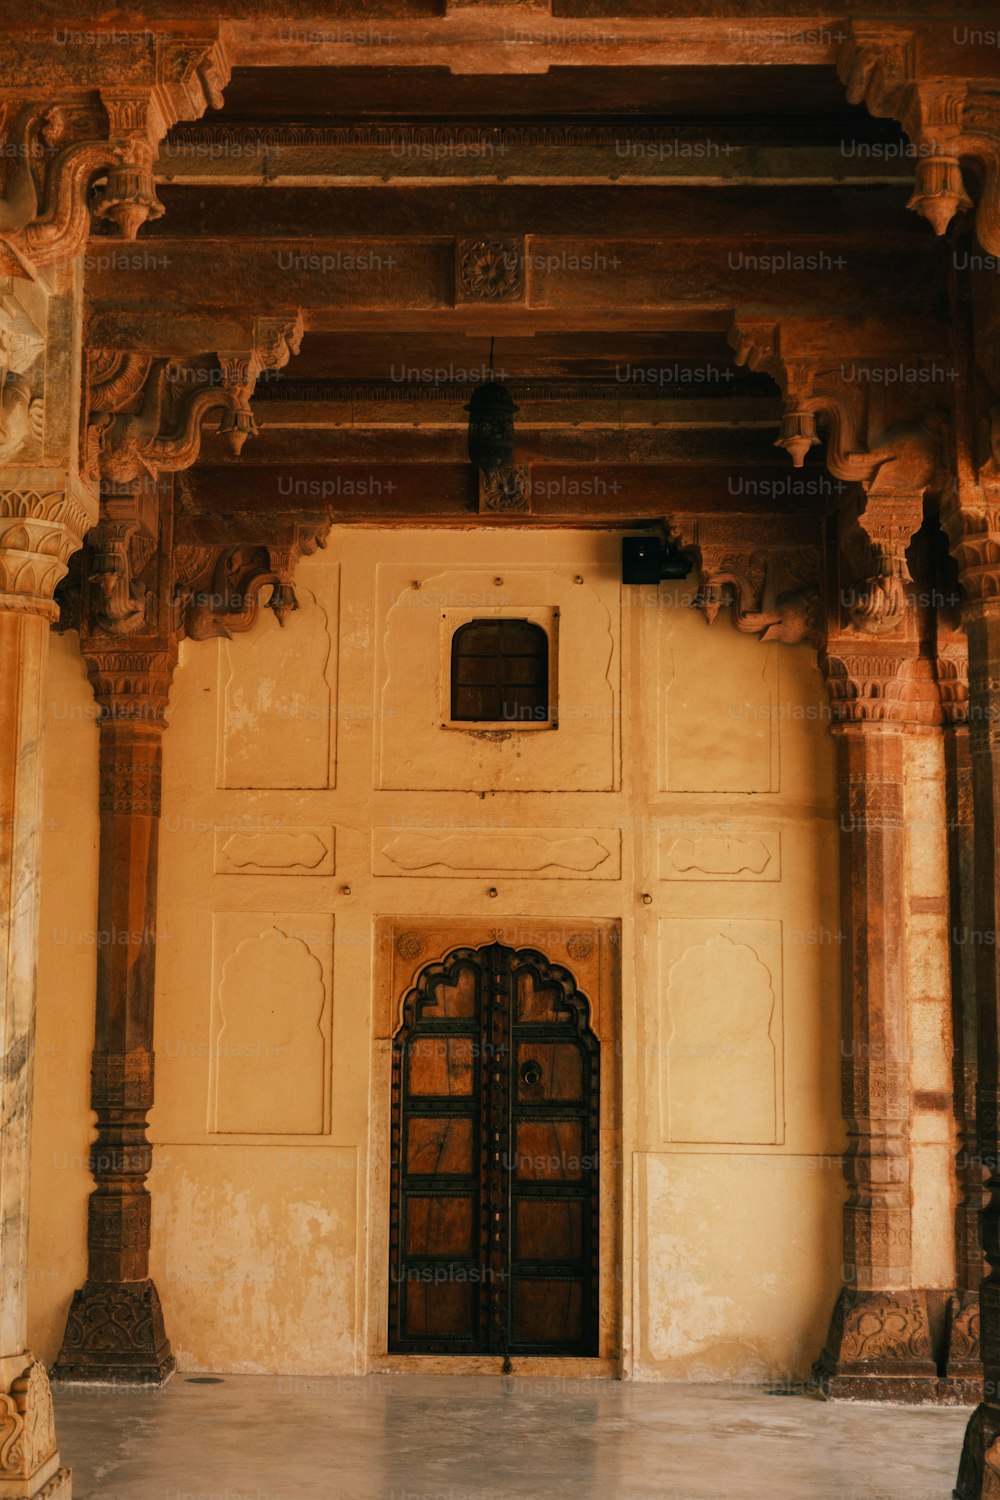 a large doorway with a clock on the wall